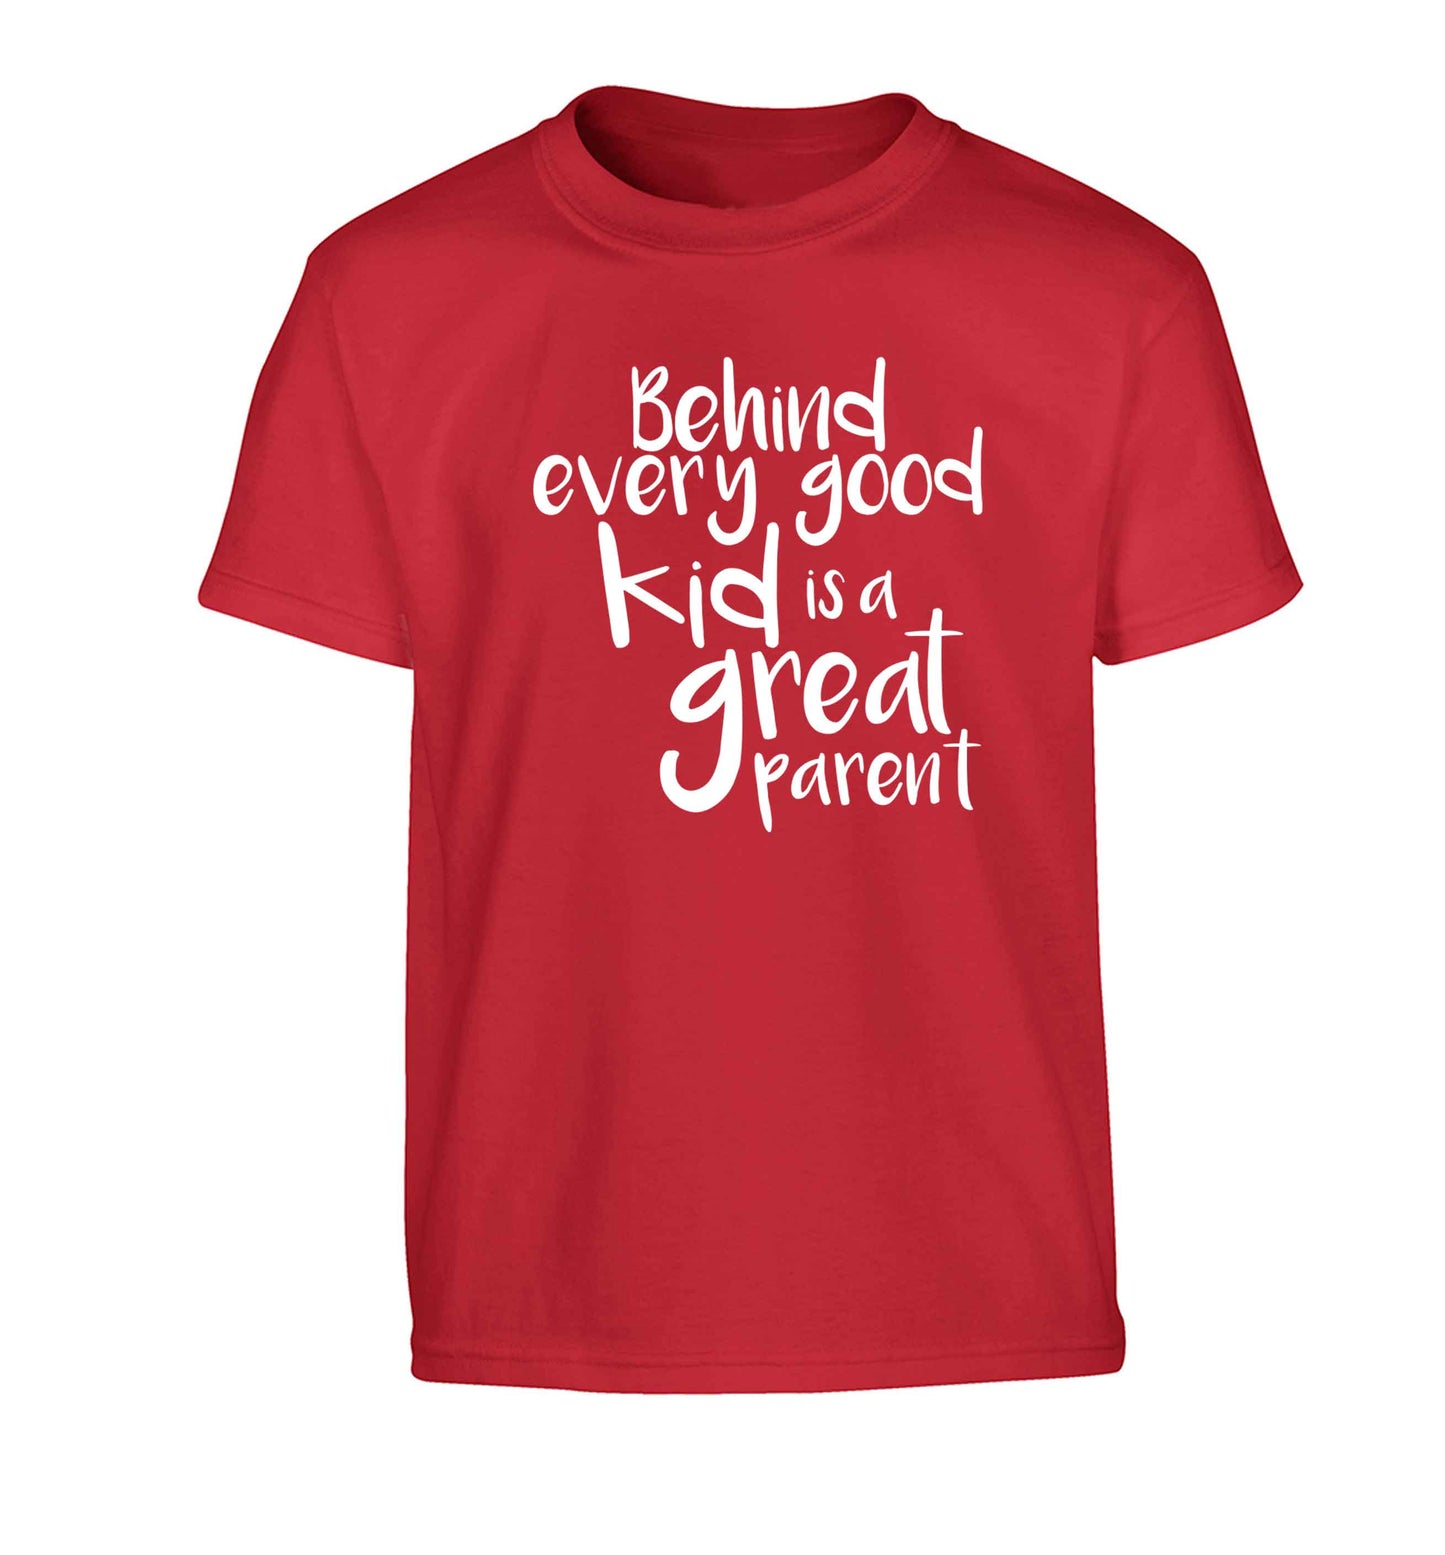 Behind every good kid is a great parent Children's red Tshirt 12-13 Years